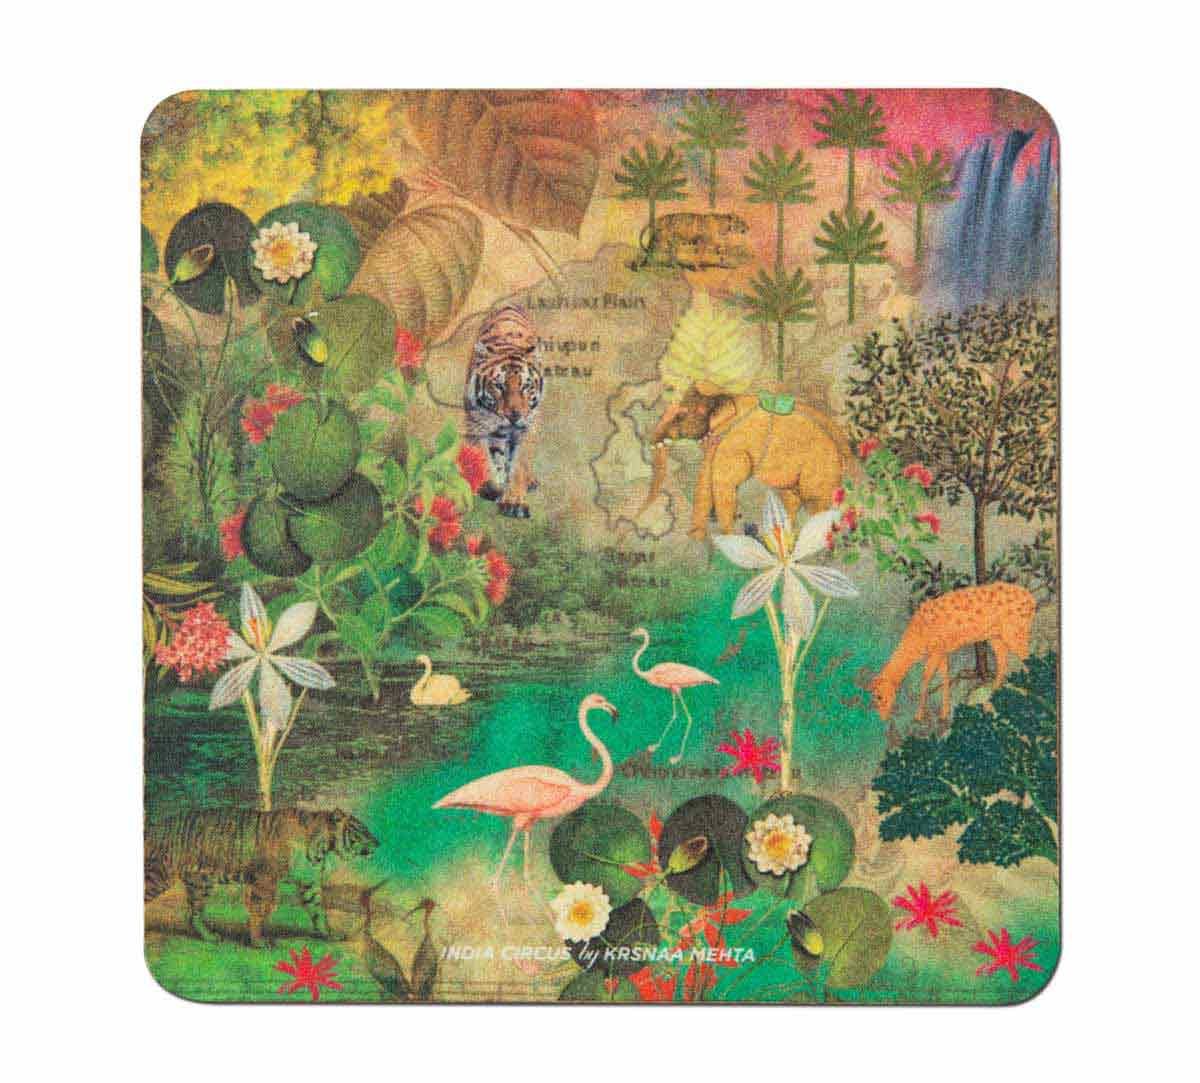 India Circus Mapping Animals Table Coaster Set of 6